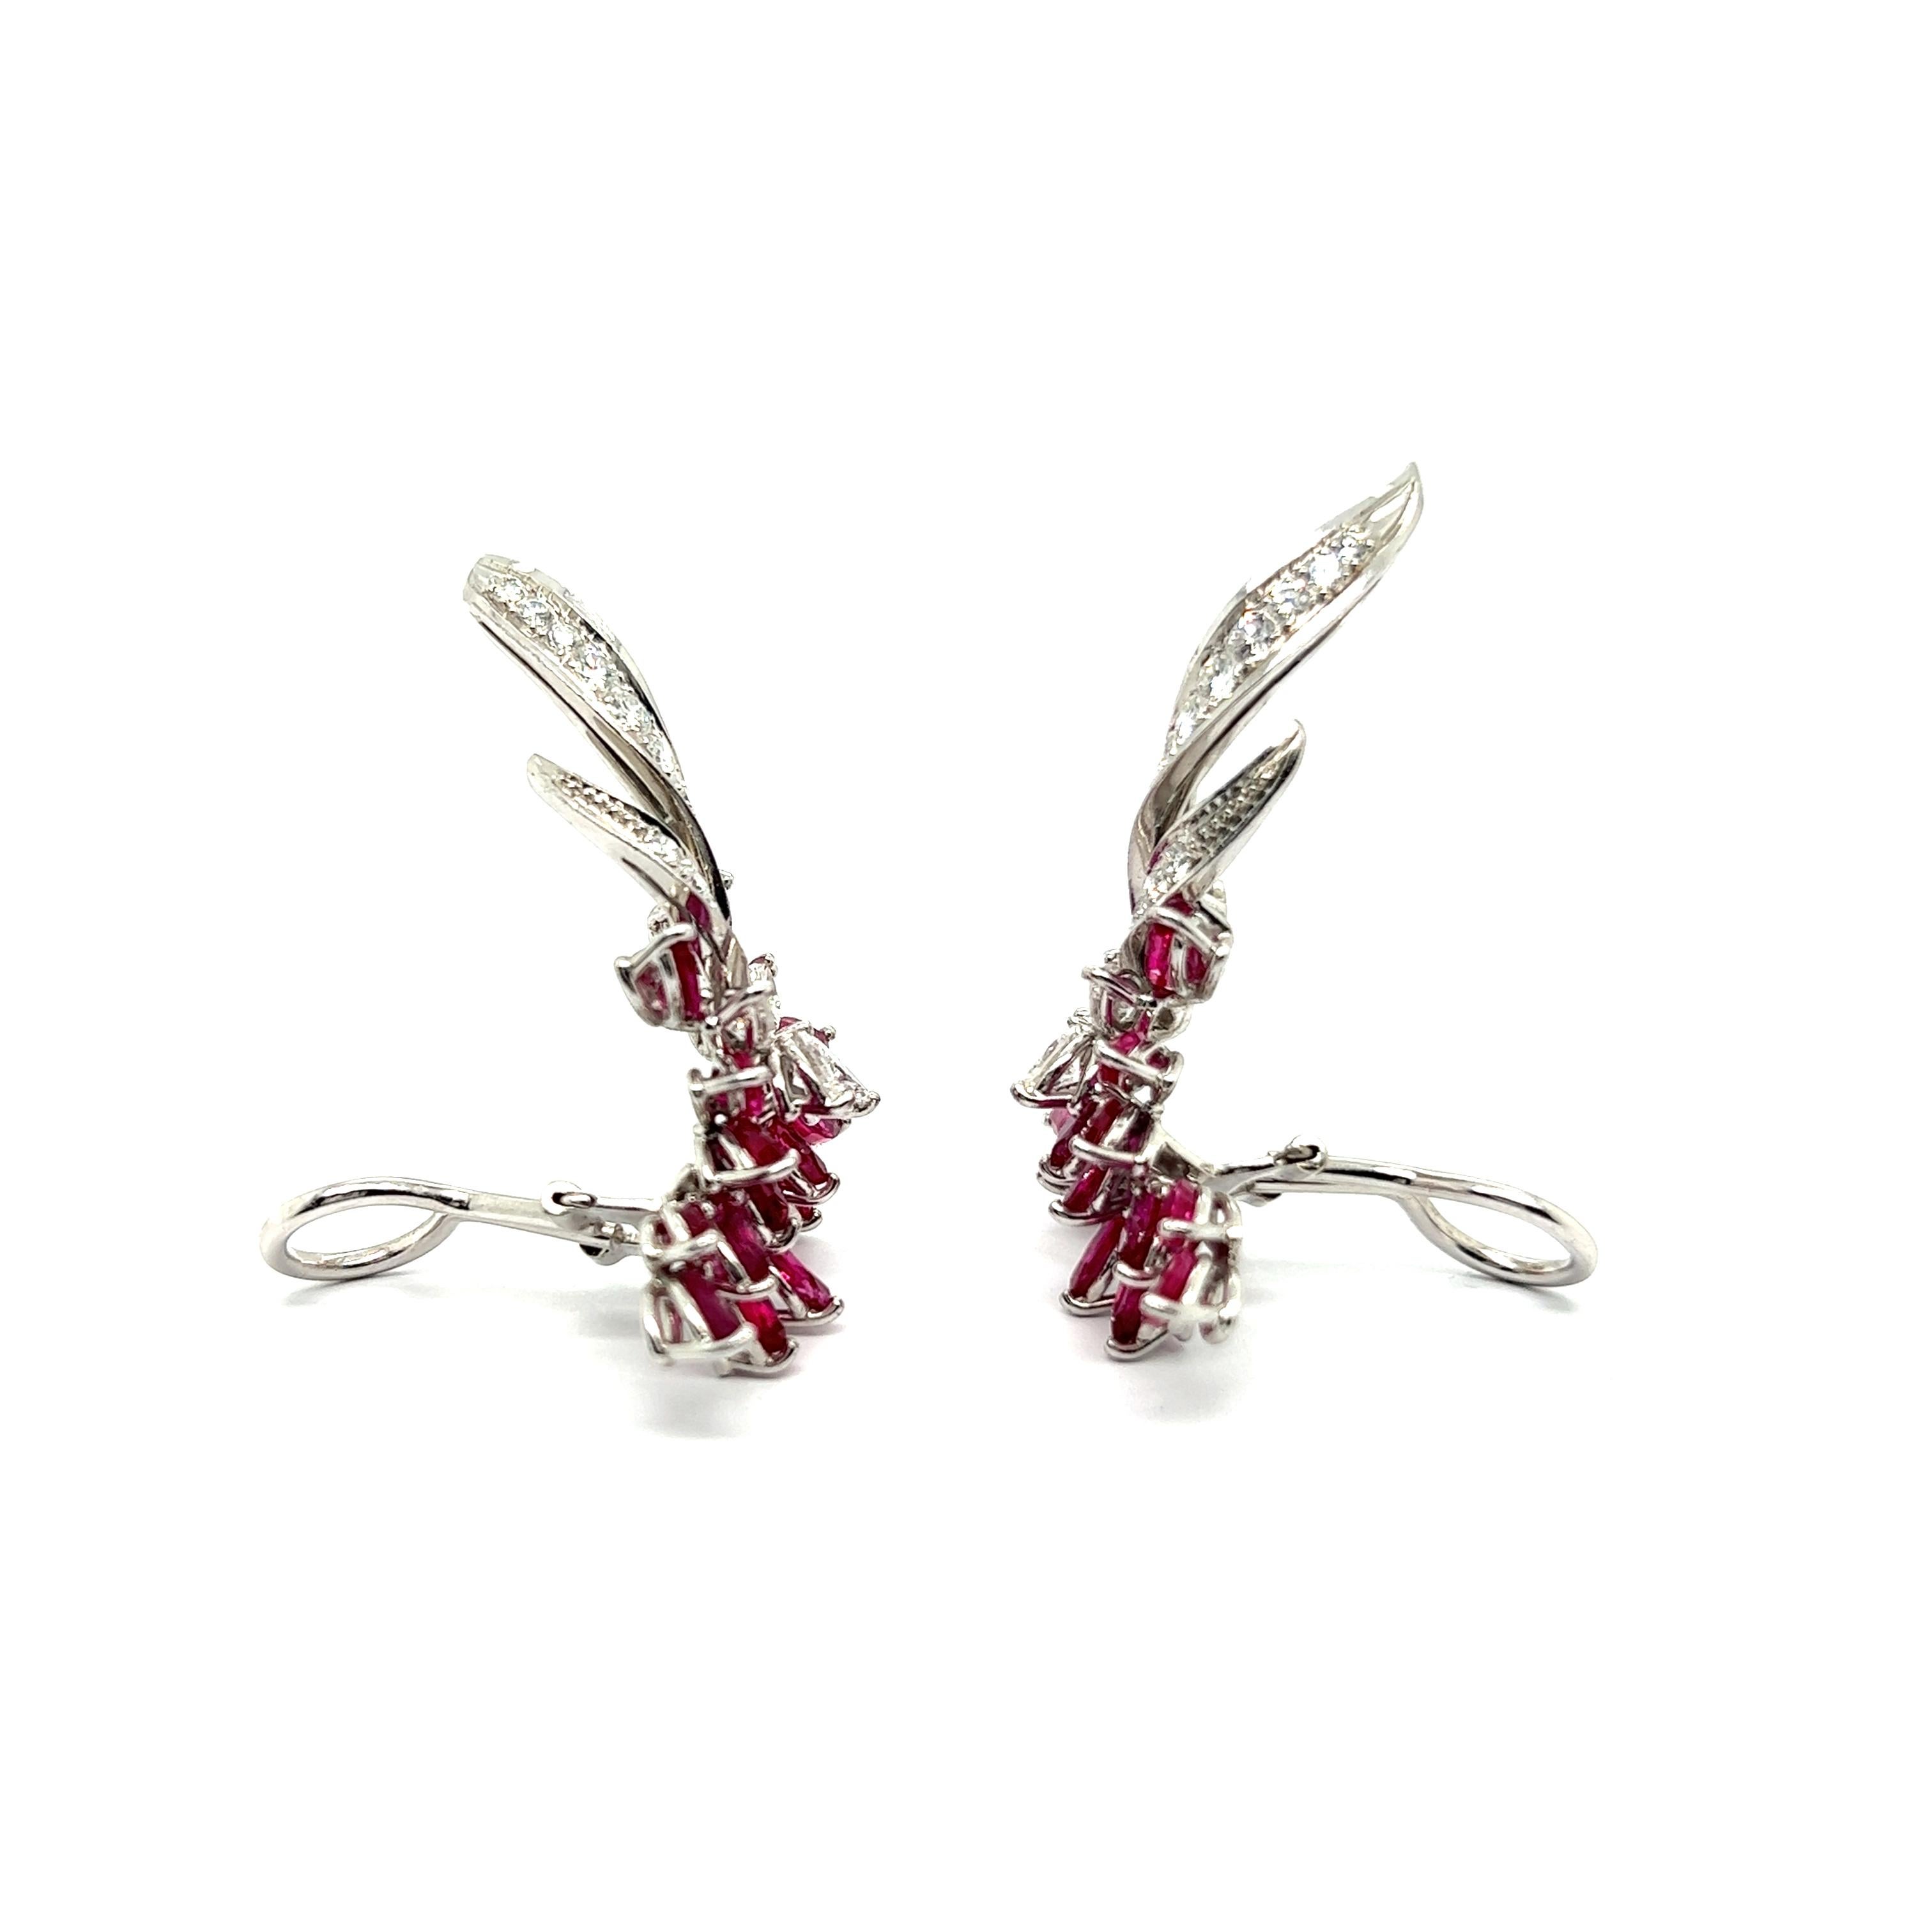 Blossom Clip-on Earrings with Rubies & Diamonds in 18 Karat White Gold For Sale 7